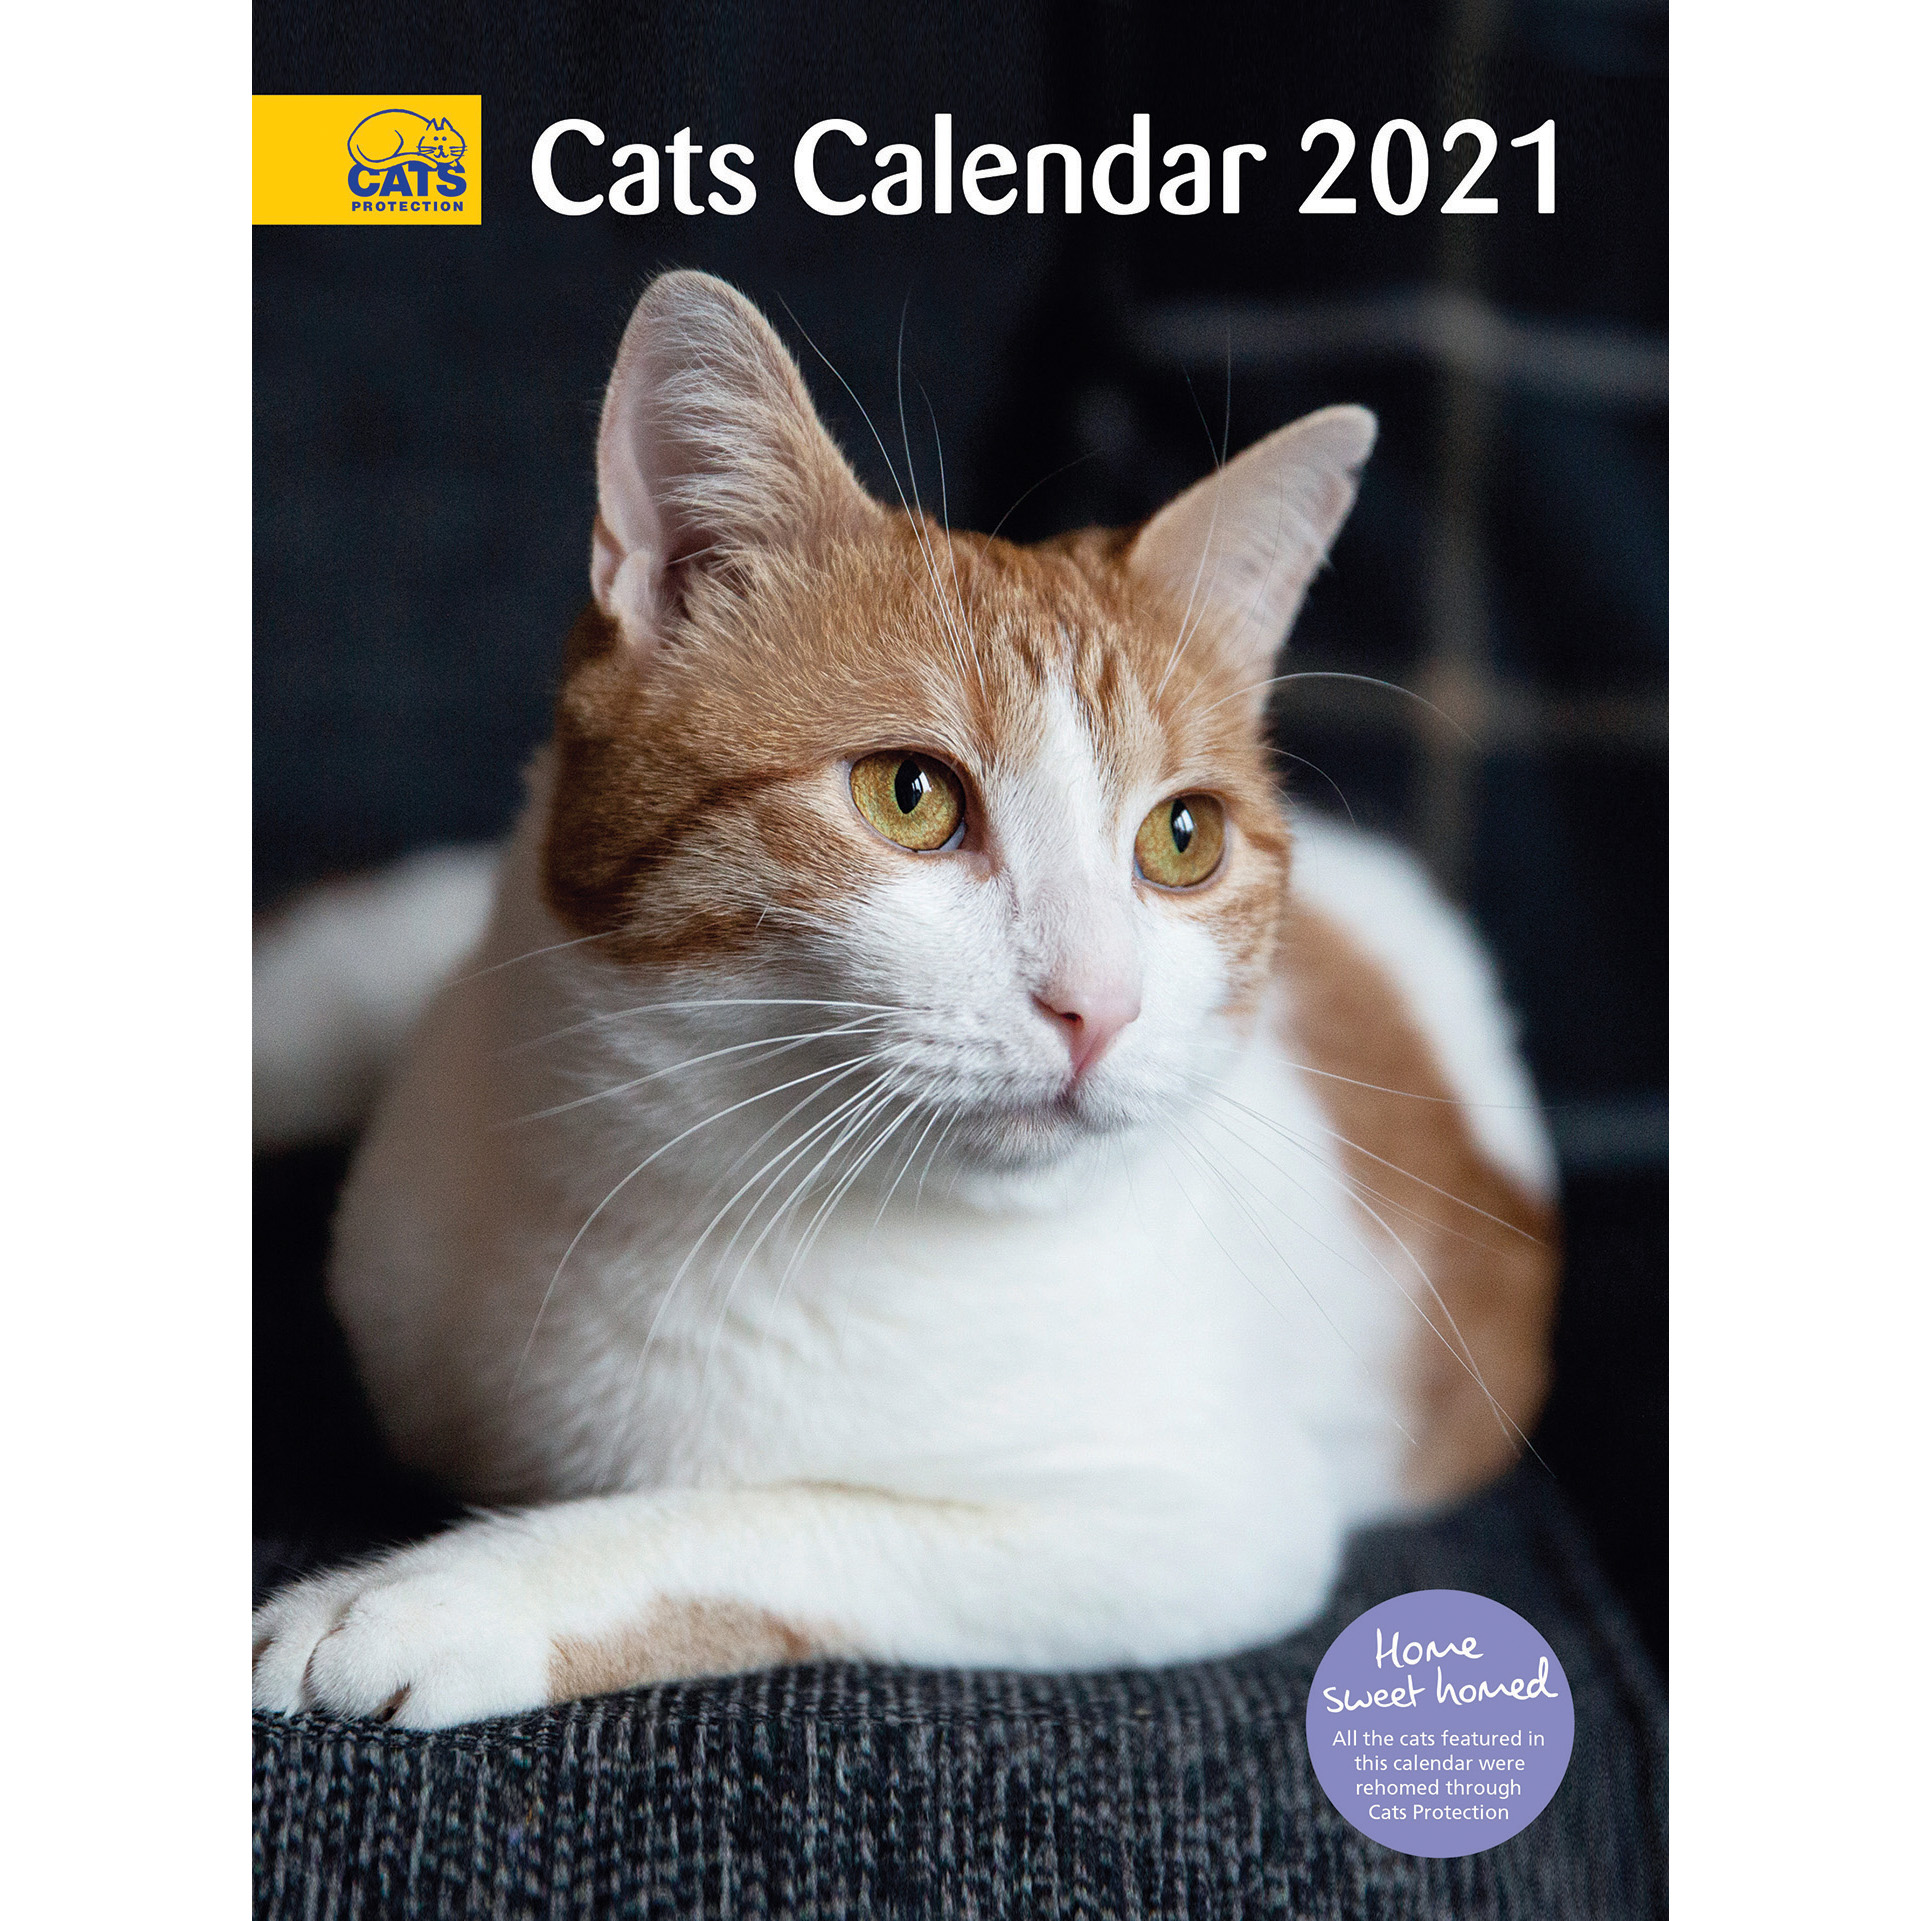 Cats Protection Cats Calendar 2021 | Buy from the Cats Protection Shop